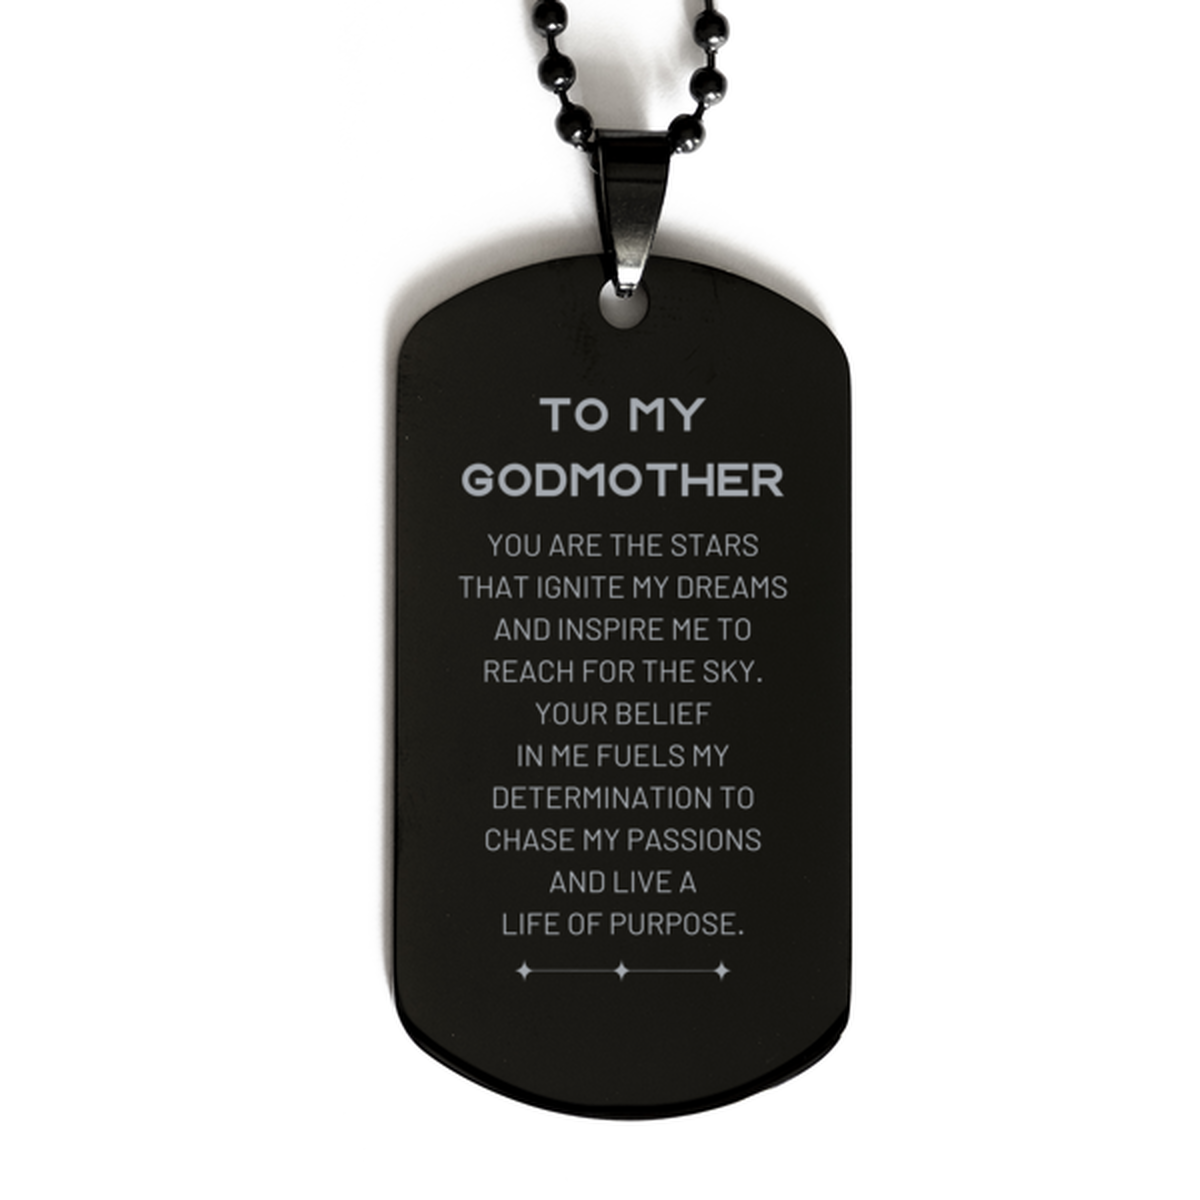 To My Godmother Black Dog Tag, You are the stars that ignite my dreams and inspire me to reach for the sky, Birthday Unique Gifts For Godmother, Thank You Gifts For Godmother